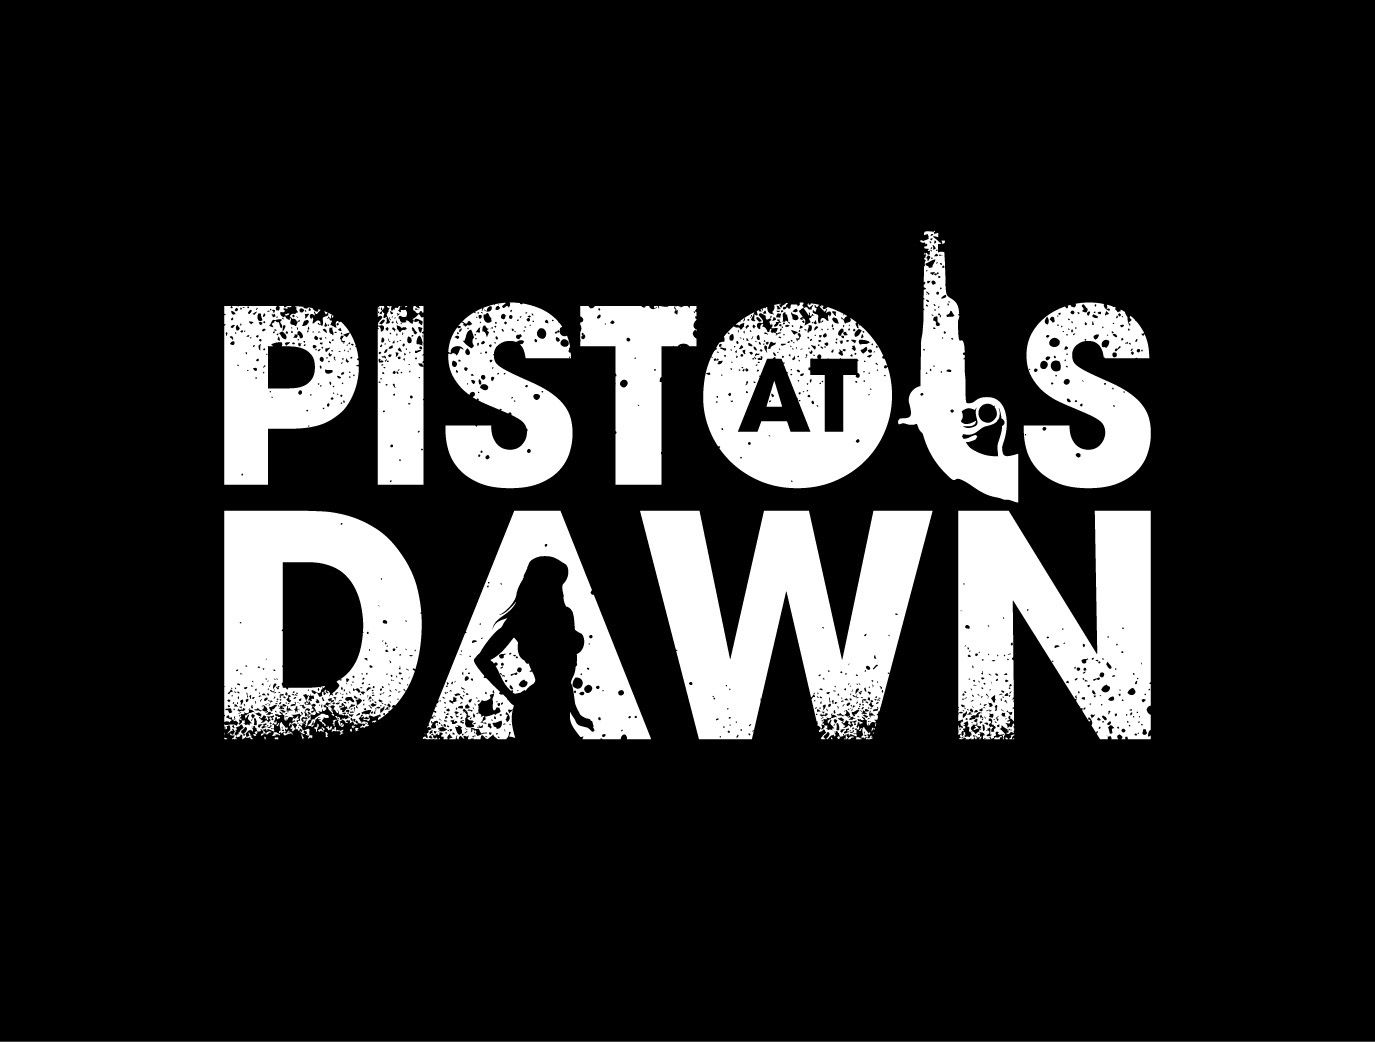 Pistol At Dawn Release 3 Highly Anticipated Singles, ‘Cold,’ ‘Gauntlet,’ and ‘All You Offer’